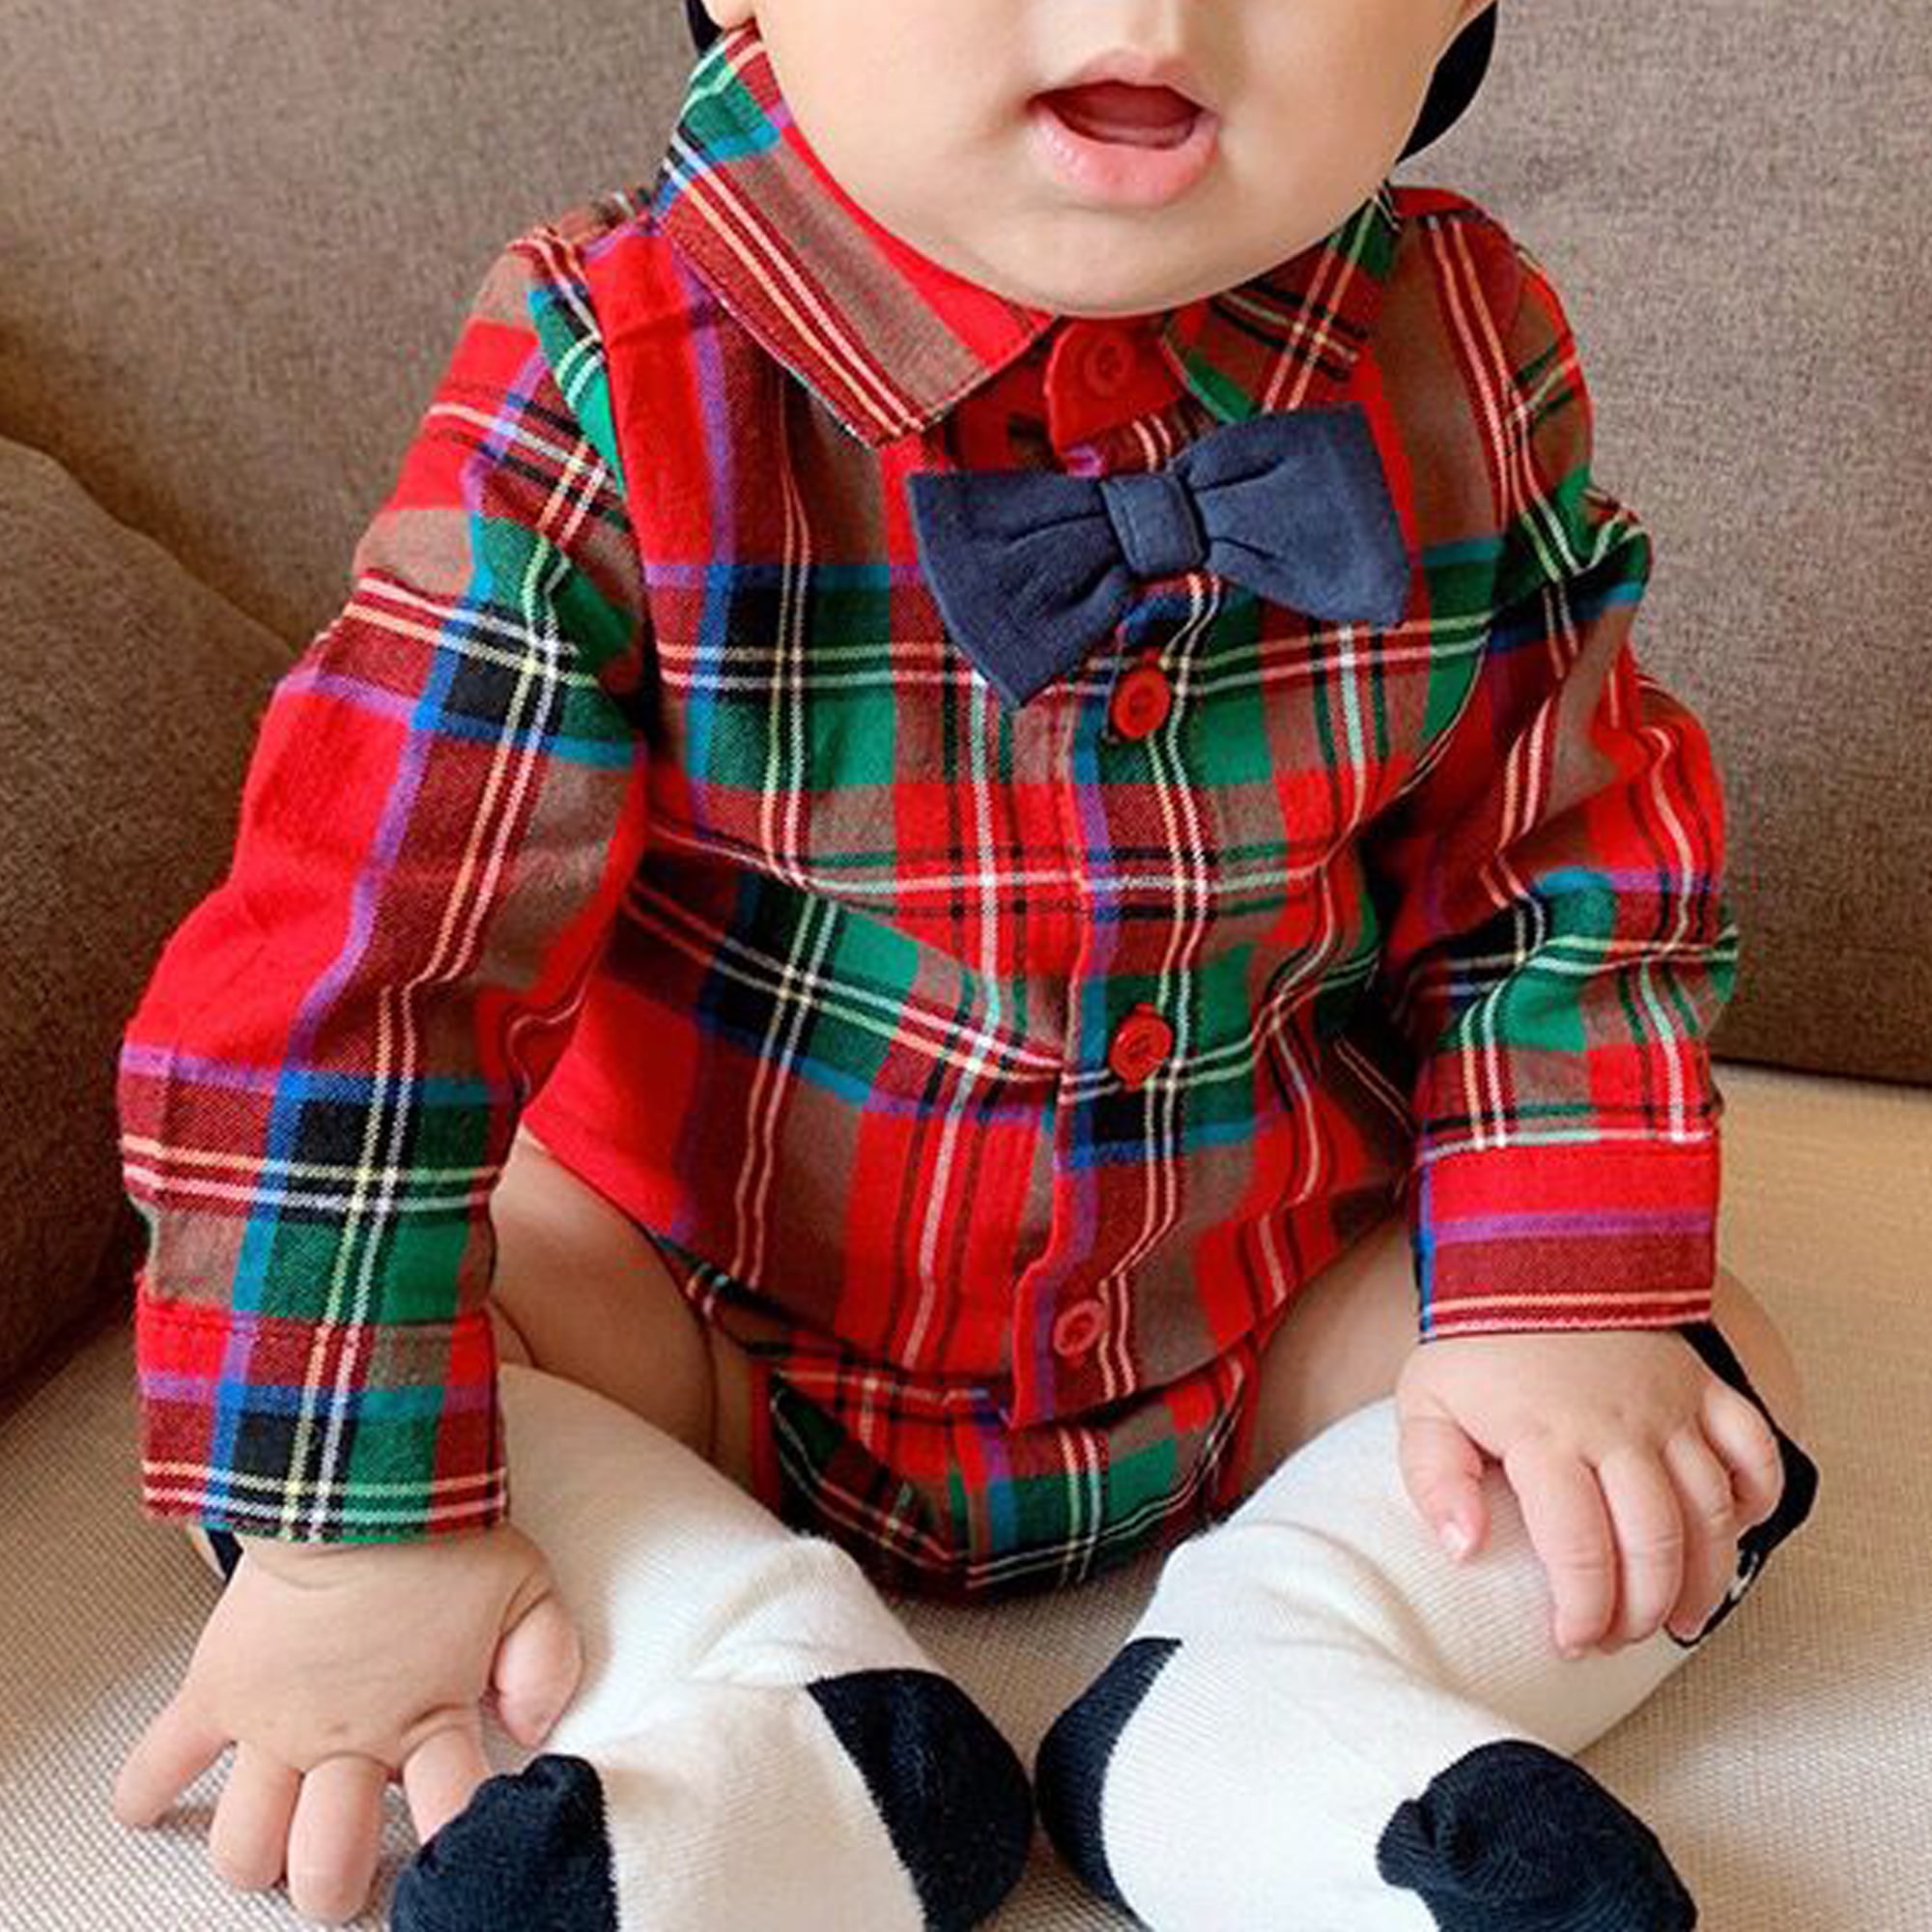 0-6 months Vintage baby boy plaid outfit.